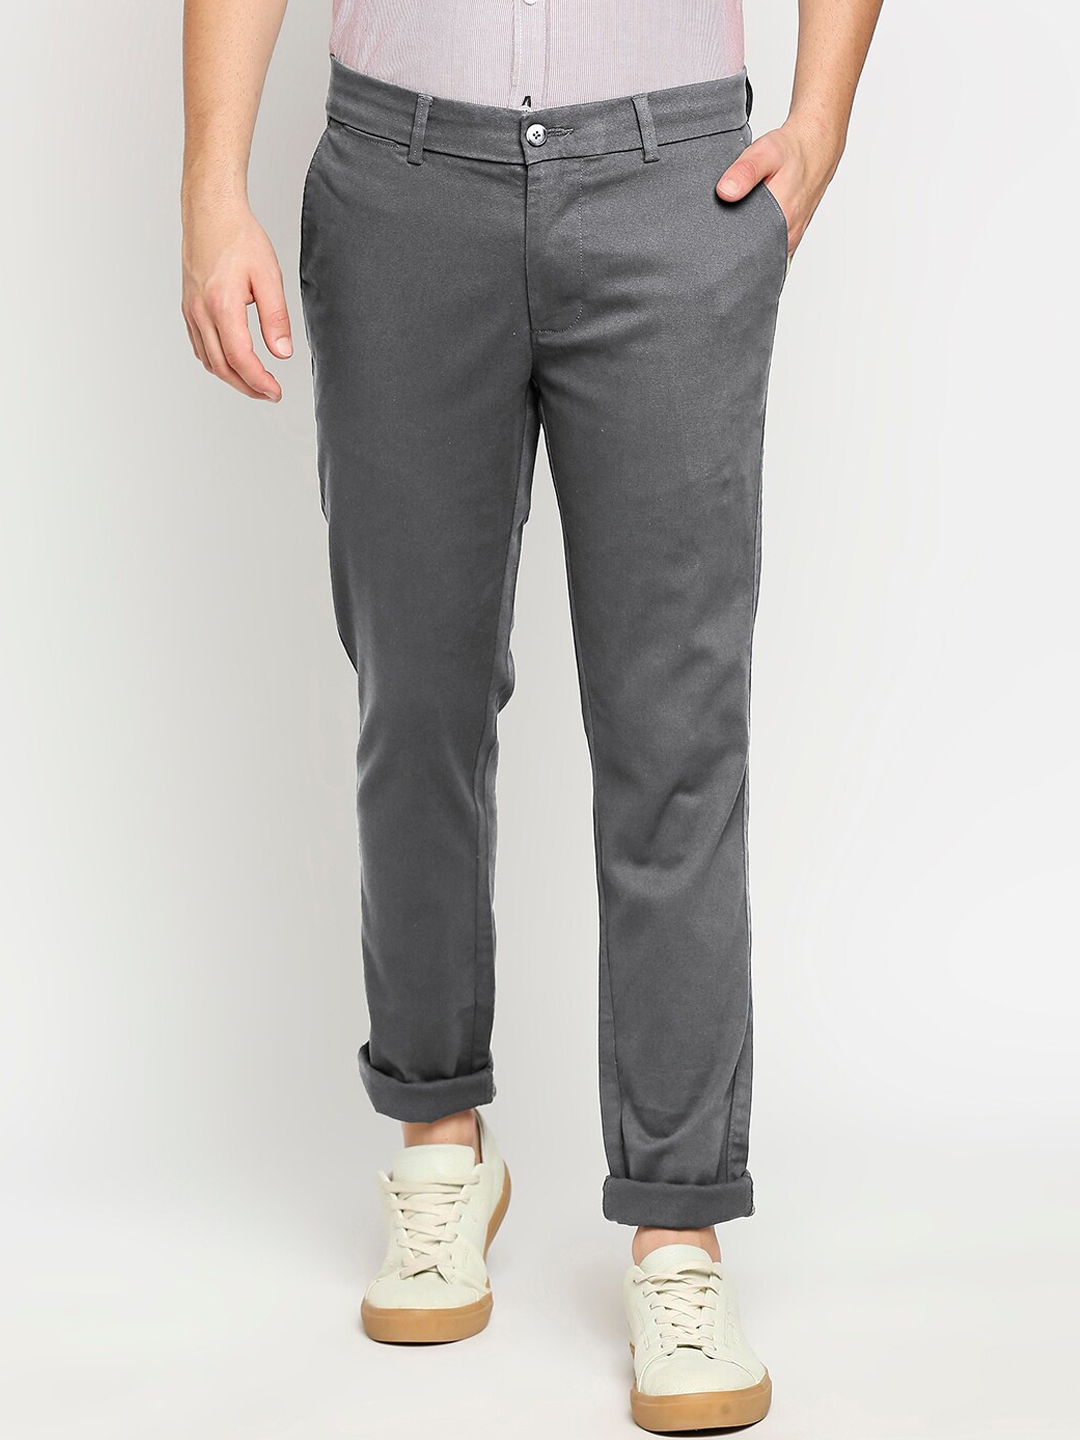 Buy Basics Men Grey Tapered Fit Trousers - Trousers for Men 15918896 ...